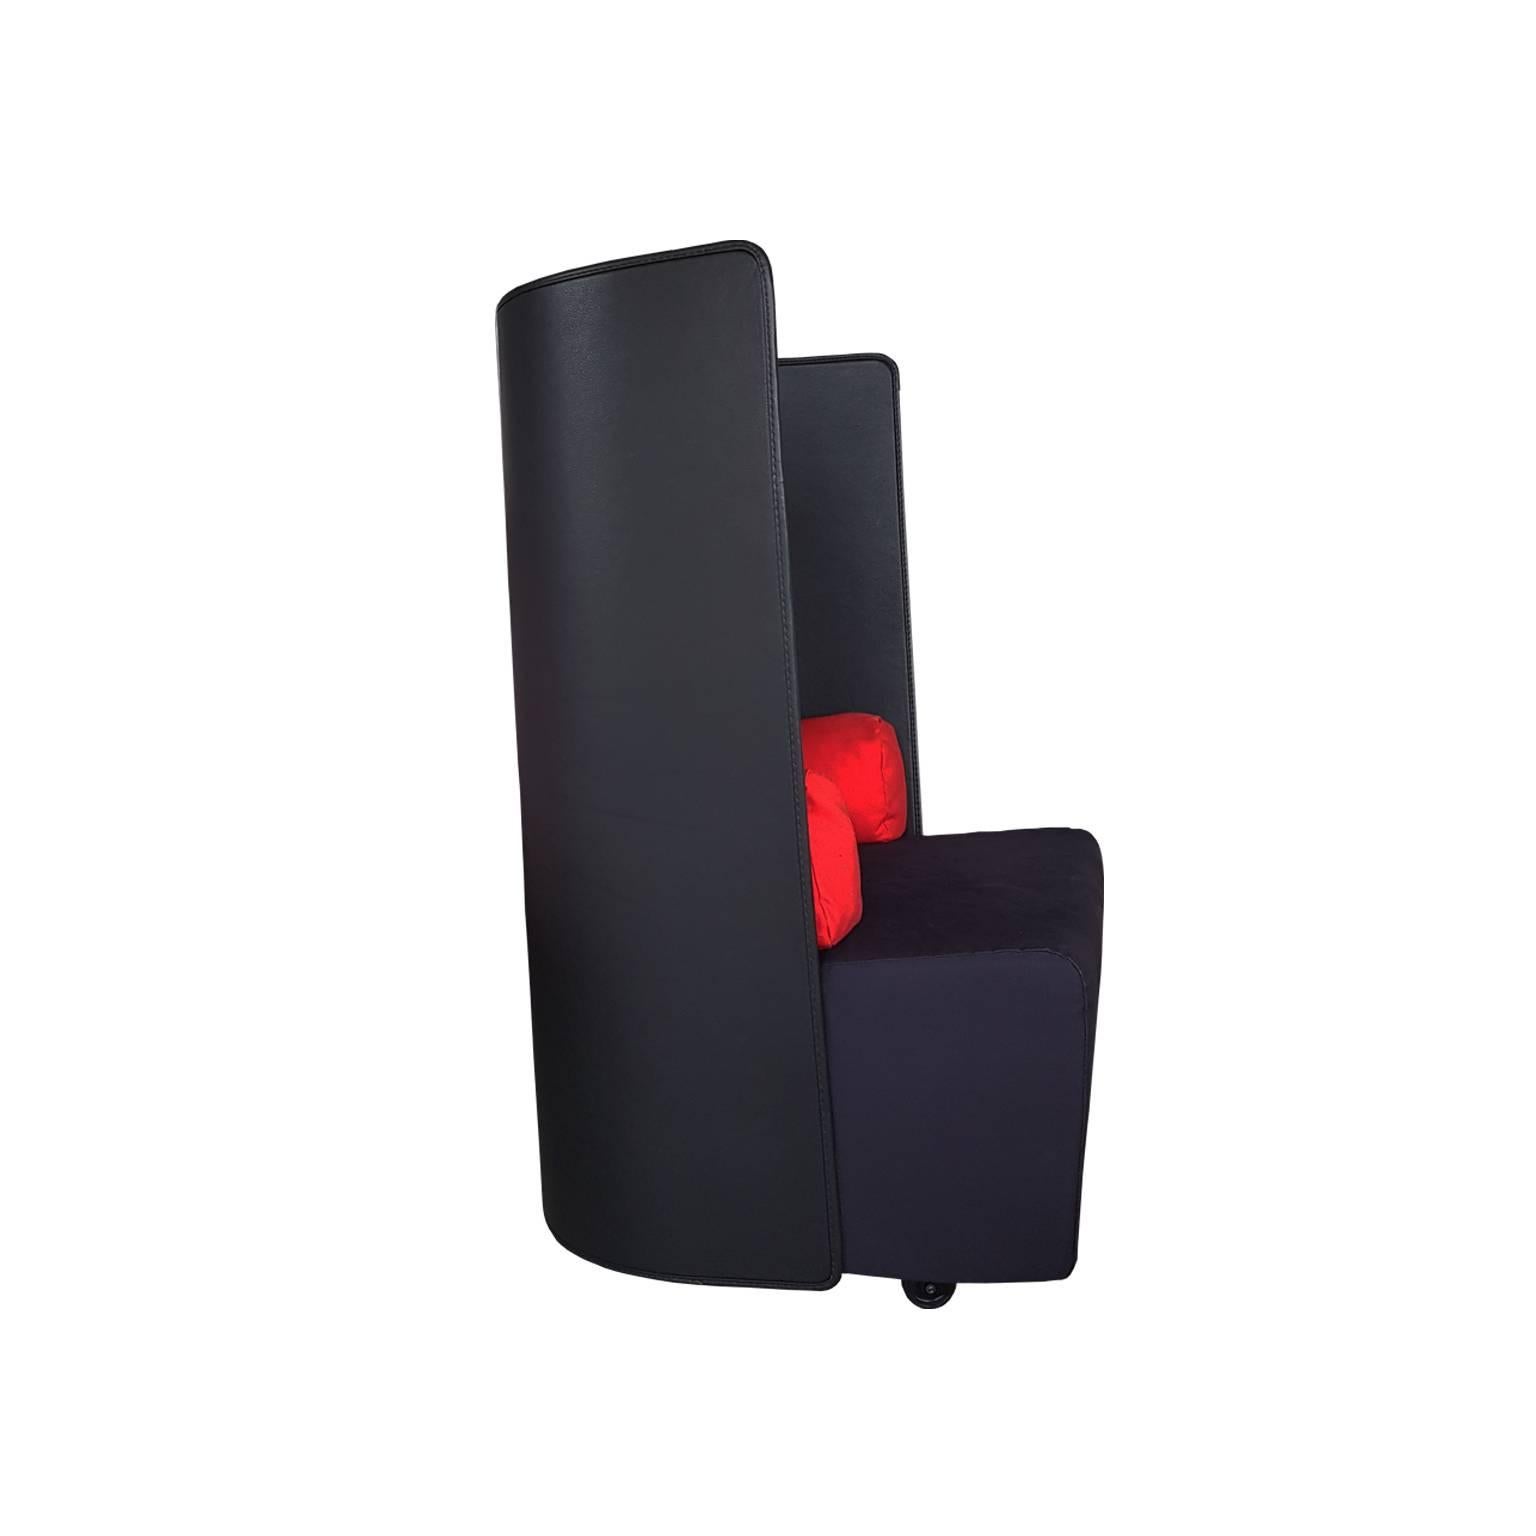 Post-Modern Vintage Armchair by Zanotta in Leather and Fabric Black / Red Late 20th Century